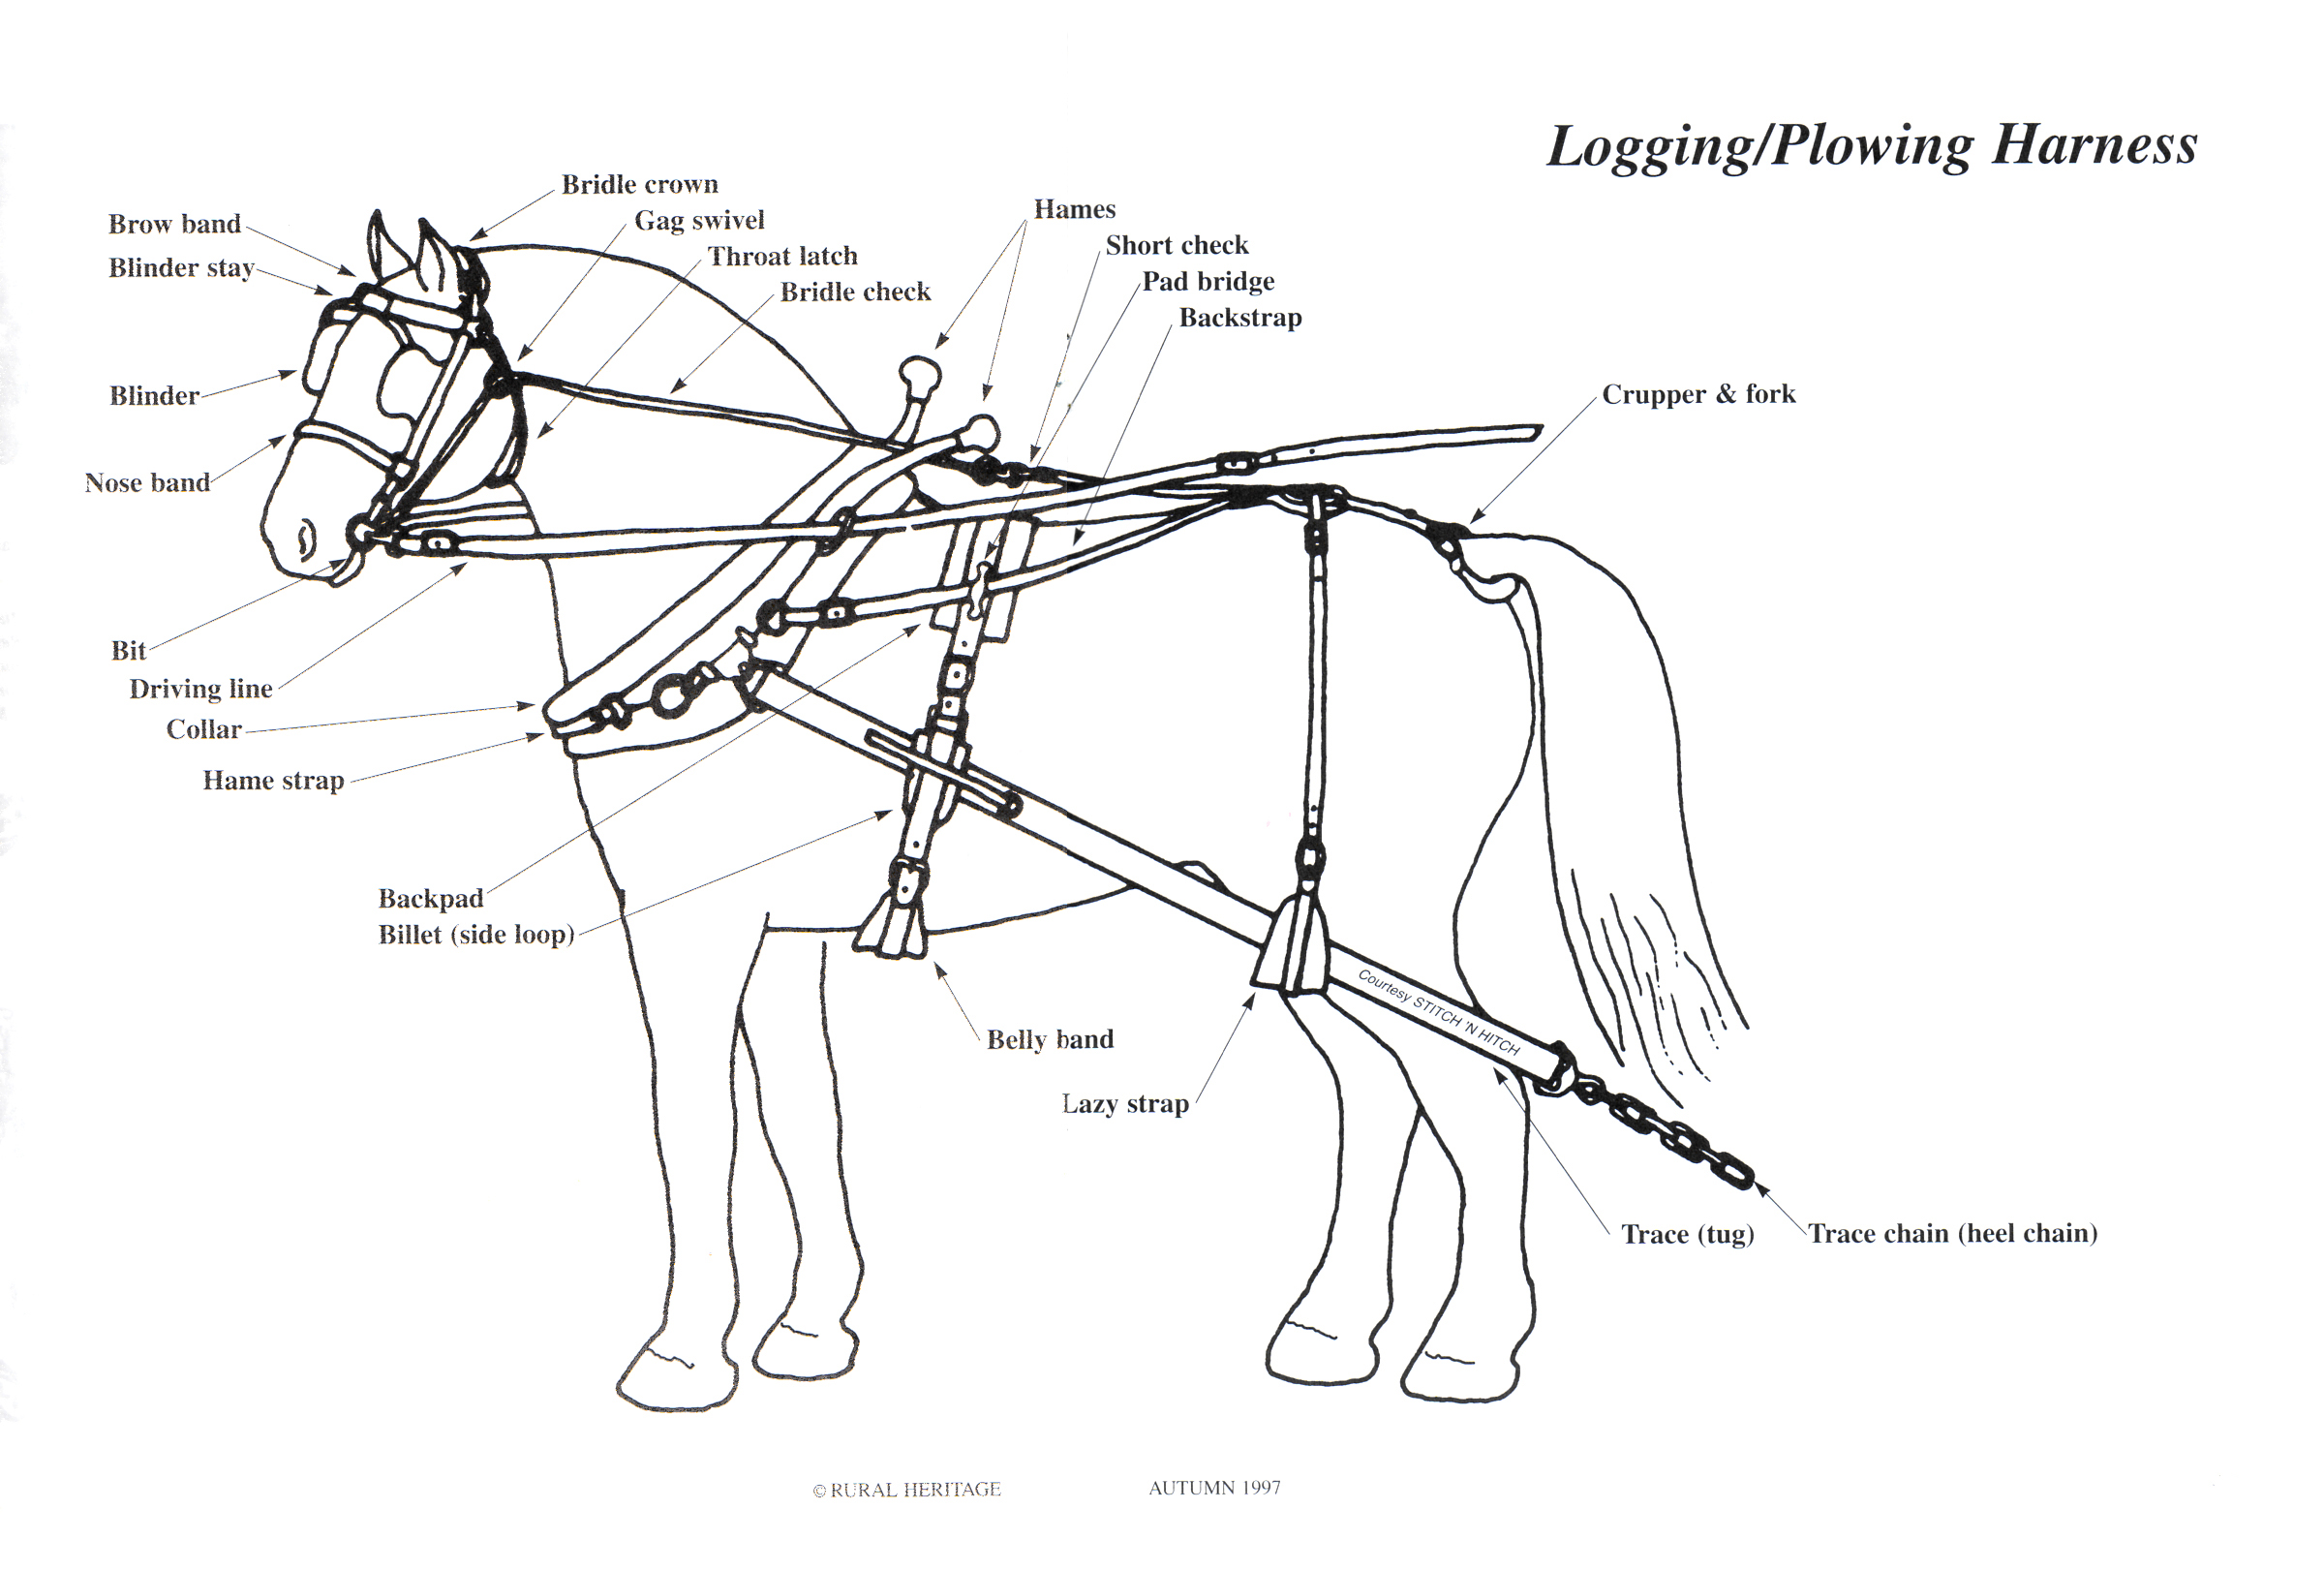 logging and plowing harness illustrations